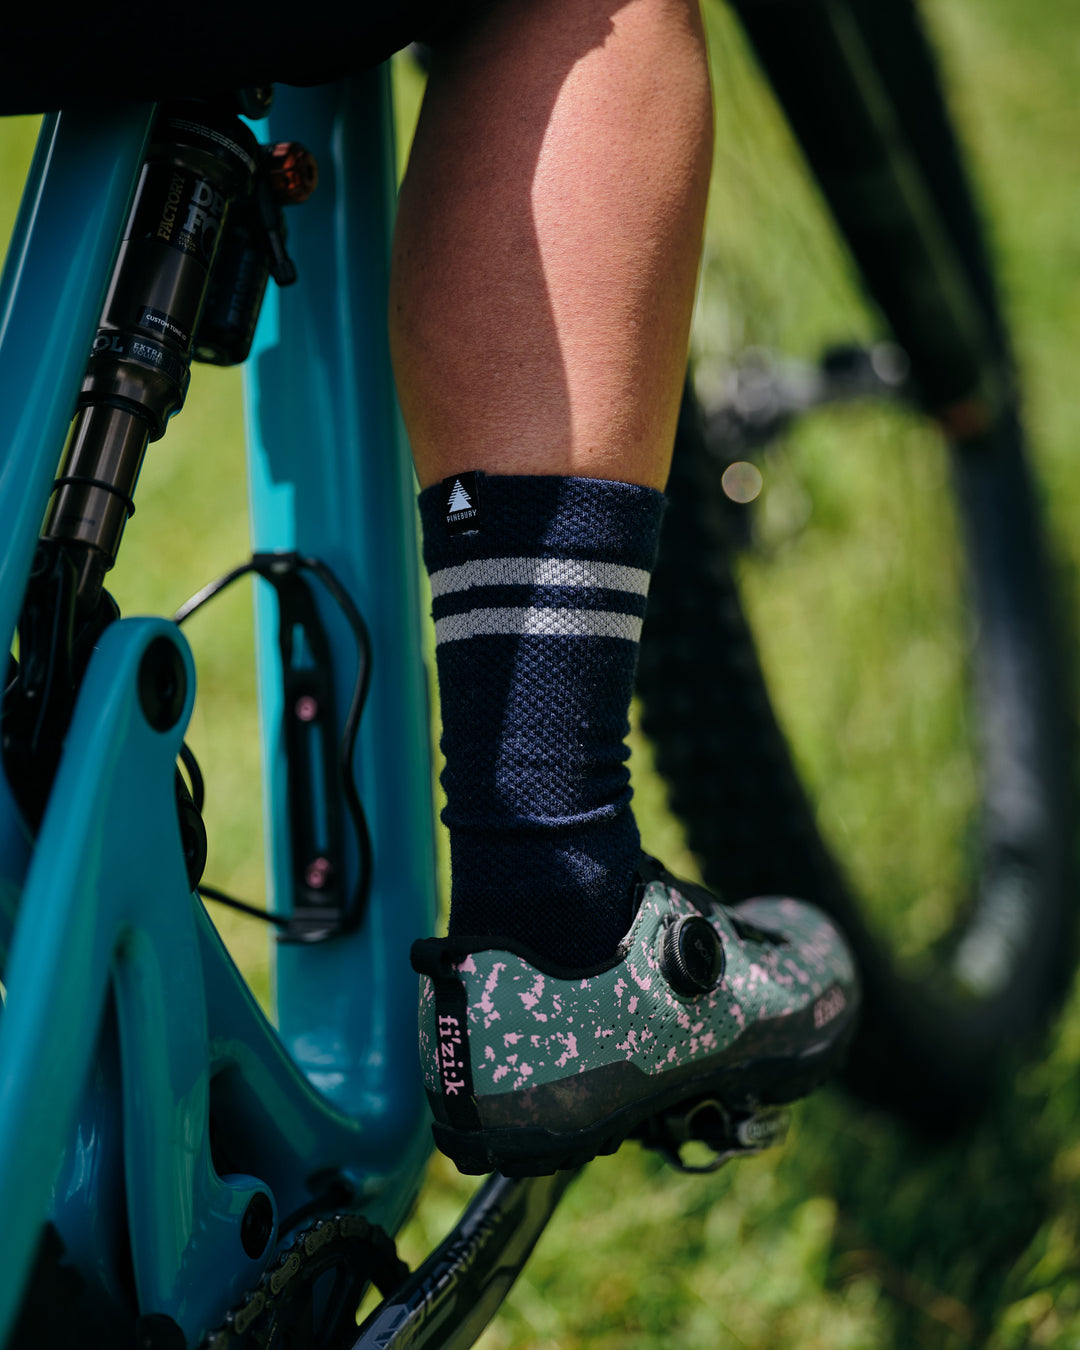 Pinebury Signature Merino Wool Sock in Navy. Close up shot of mounting biker on a teal bike, right leg on pedal with navy blue sock that has light grey stripes and they are wearing a colorful fizik shoe.